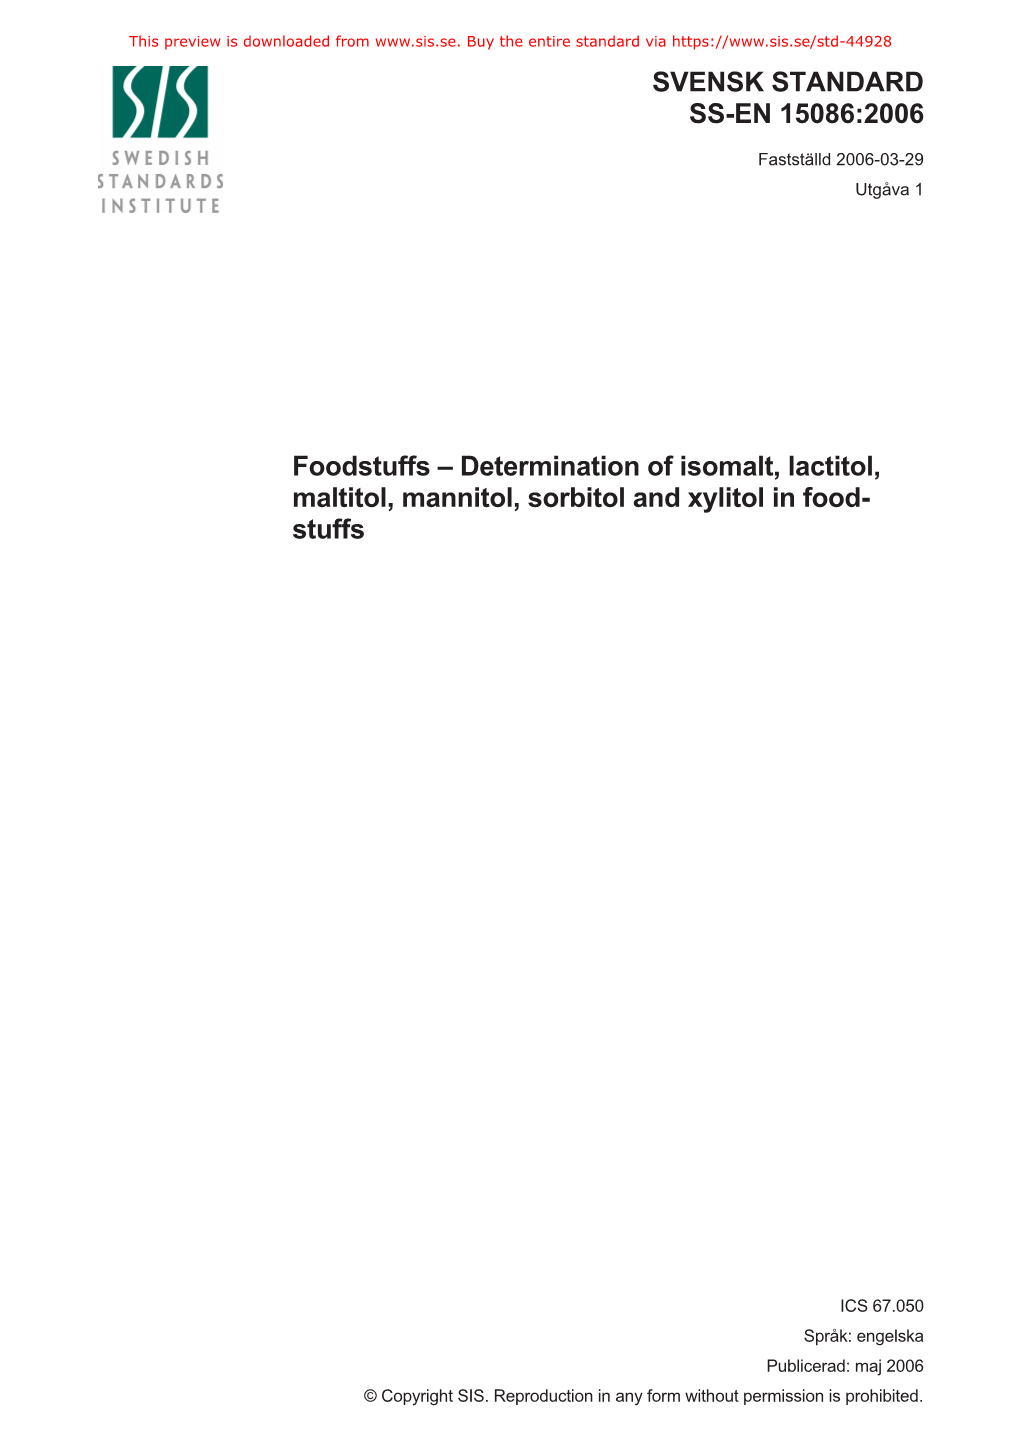 Determination of Isomalt, Lactitol, Maltitol, Mannitol, Sorbitol and Xylitol in Food- Stuffs